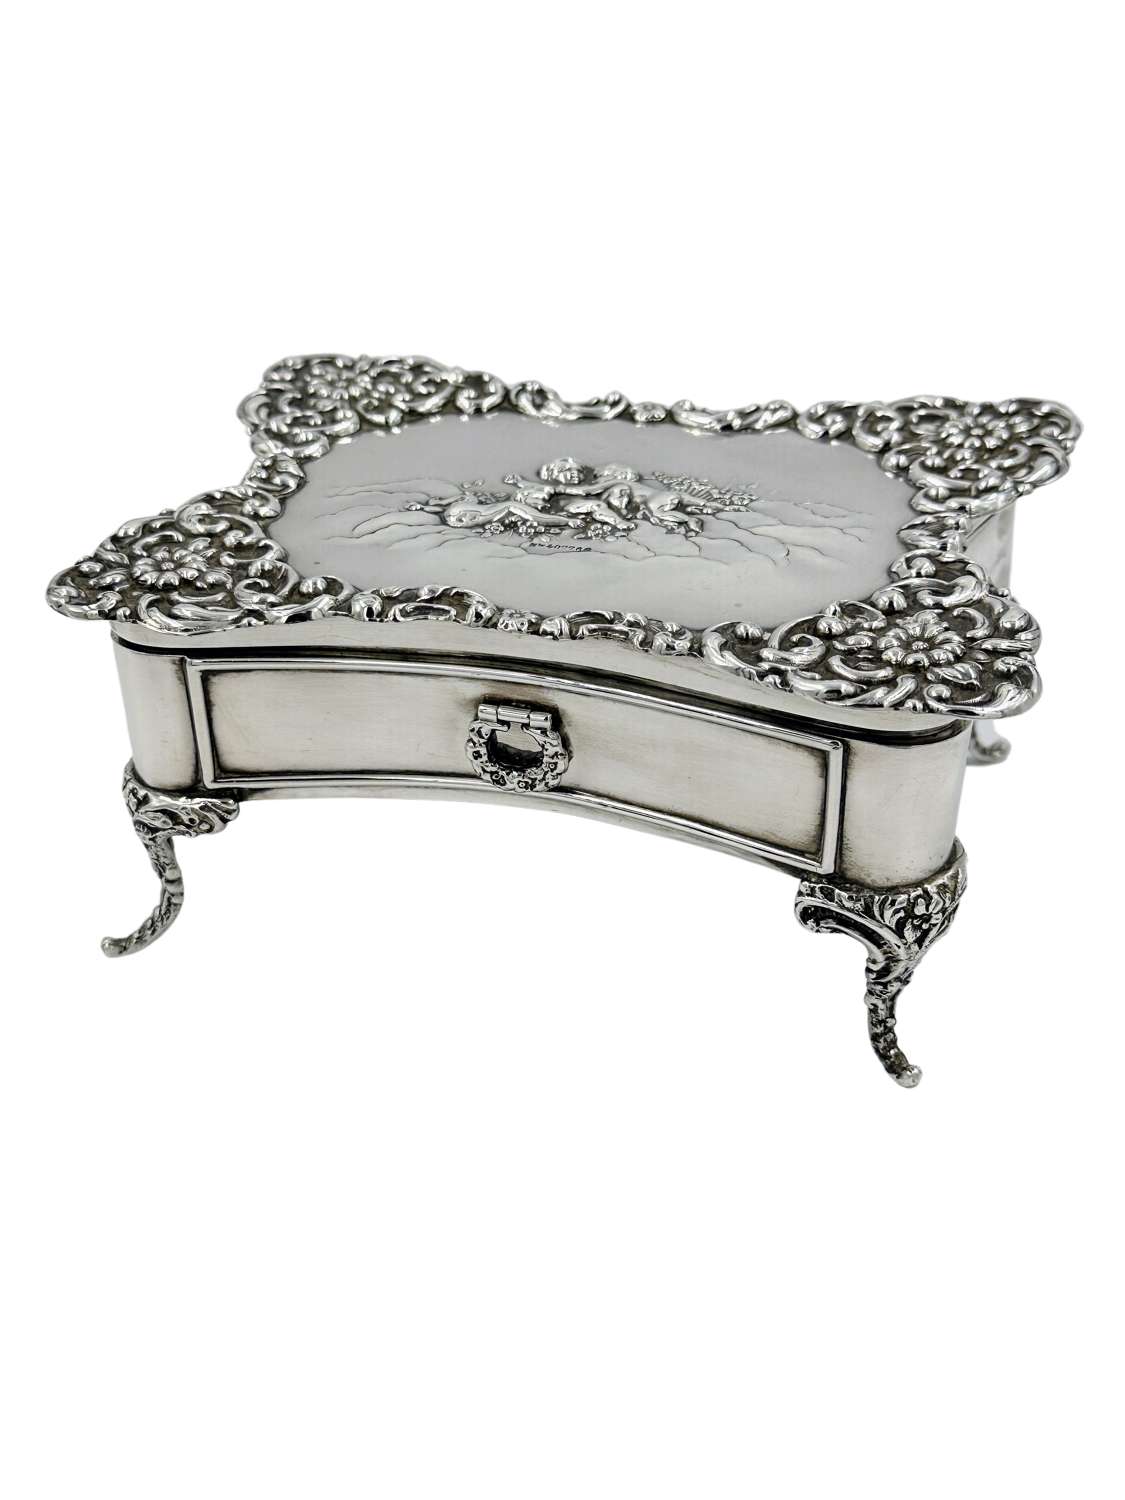 Antique Large Solid Silver Jewellery Box on Legs with Cherubs Decor